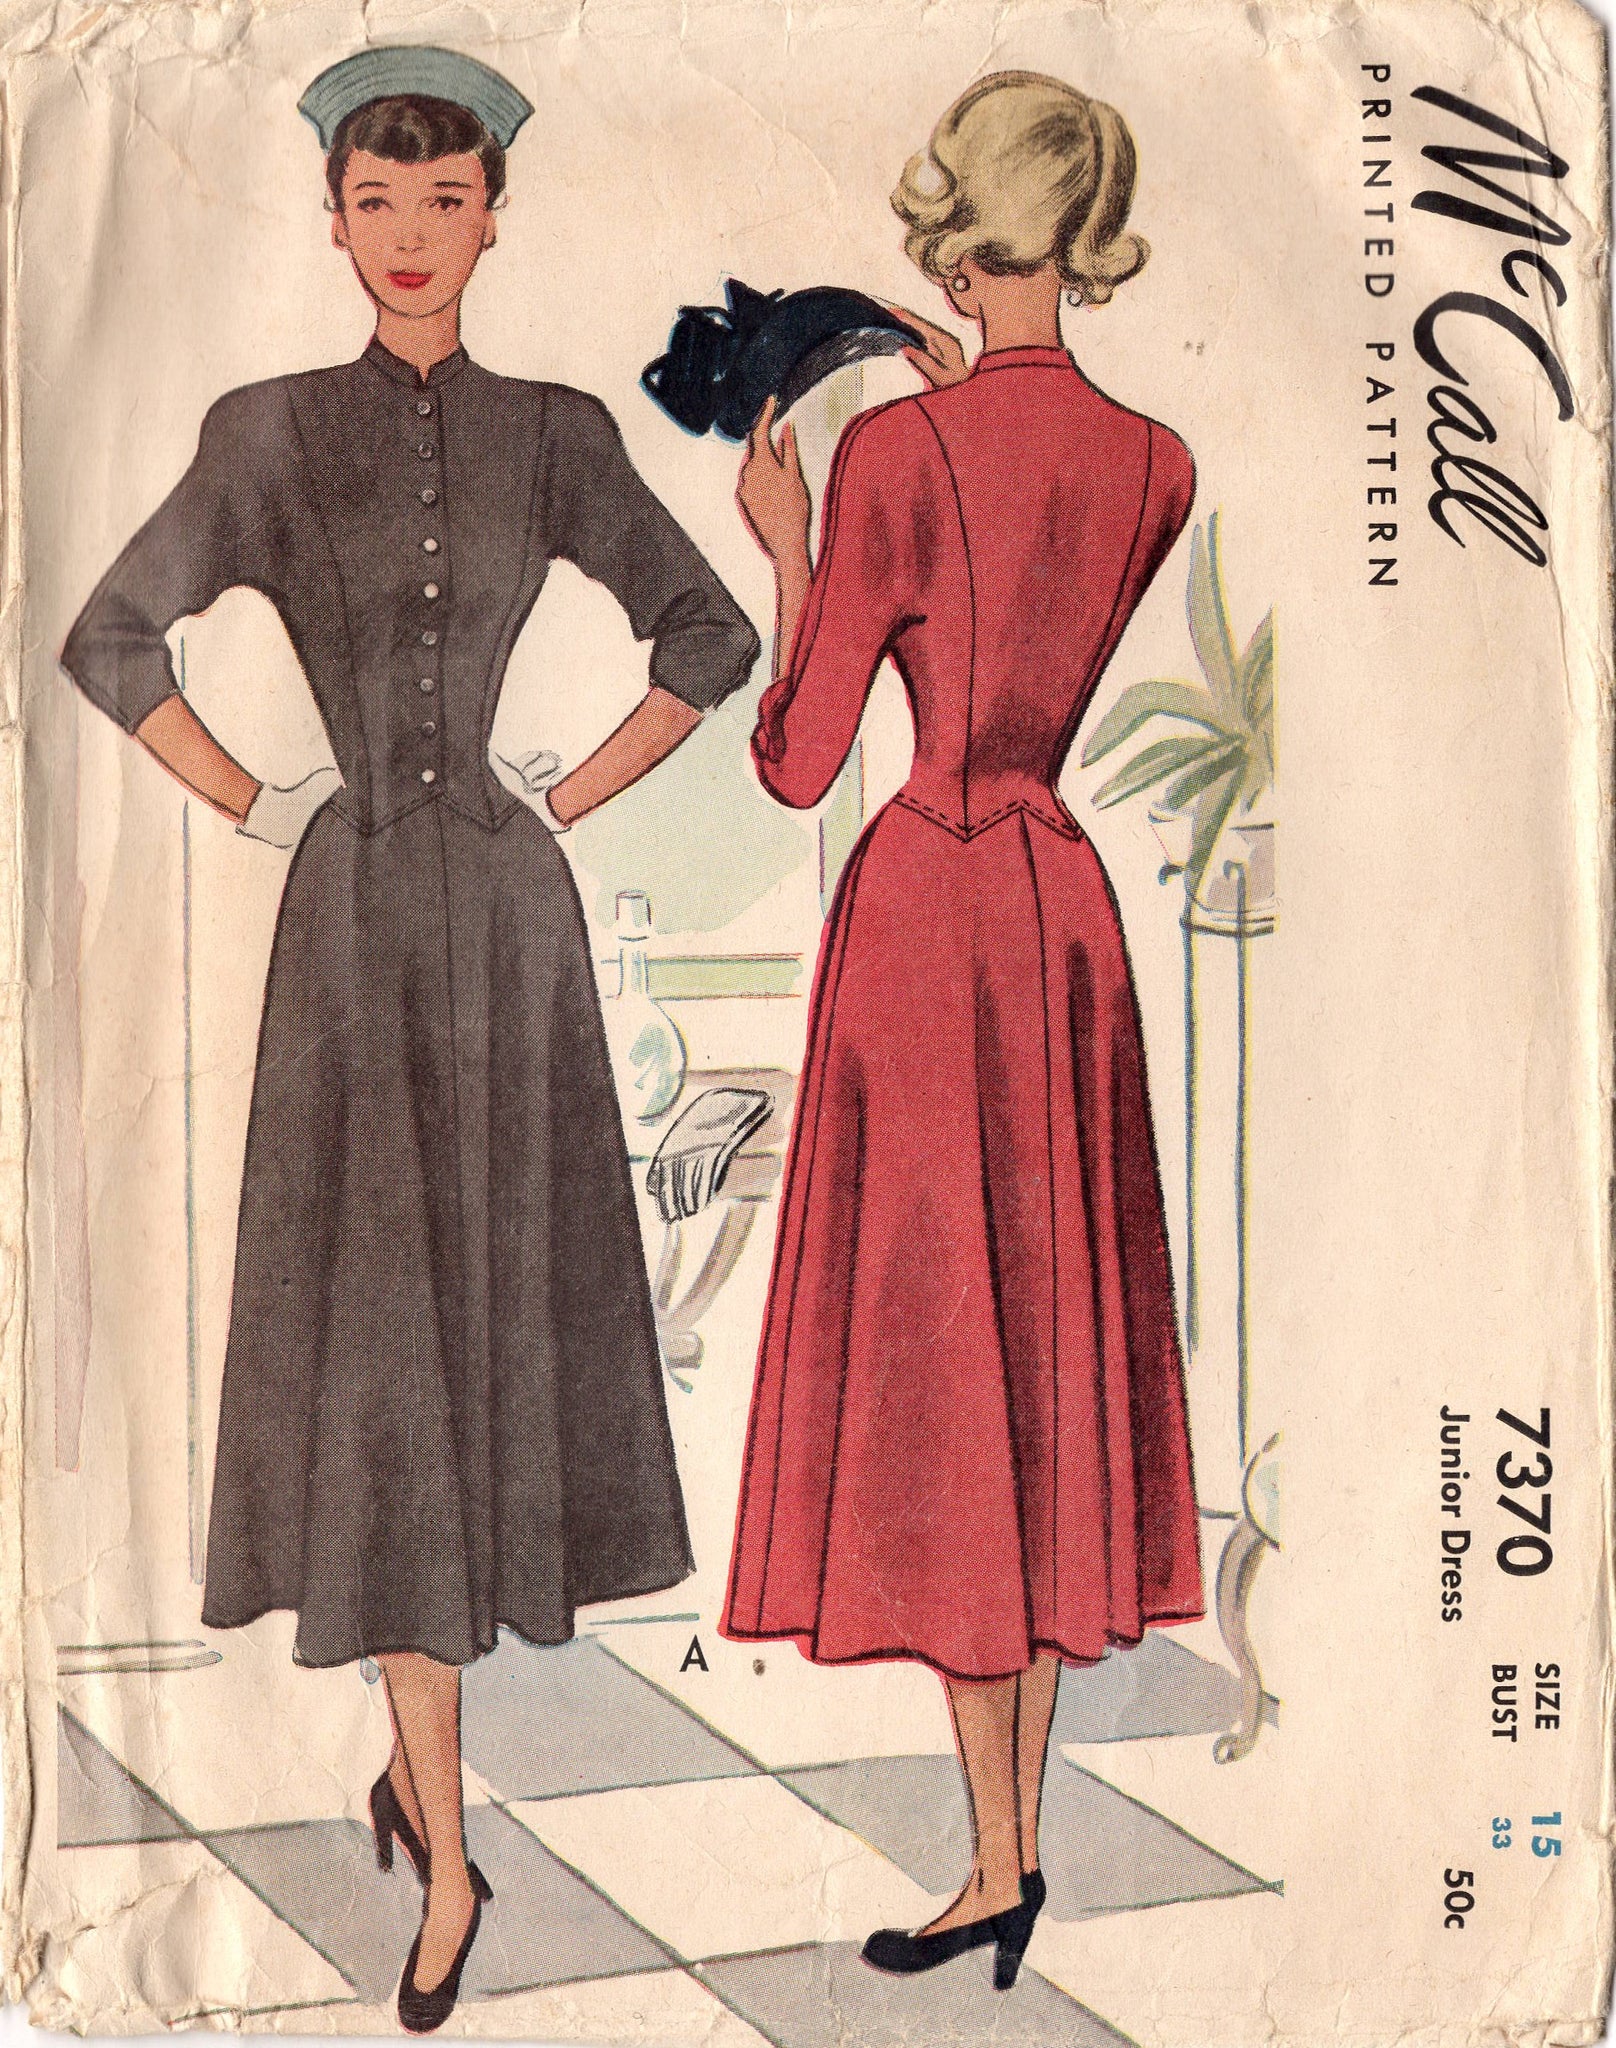 Amazon.com: Simplicity Misses' Vintage 1950's One Piece Dresses and Jacket  Sewing Pattern Kit, Design Code S9819, Sizes 18-20-22-24-26, Multicolor :  Arts, Crafts & Sewing